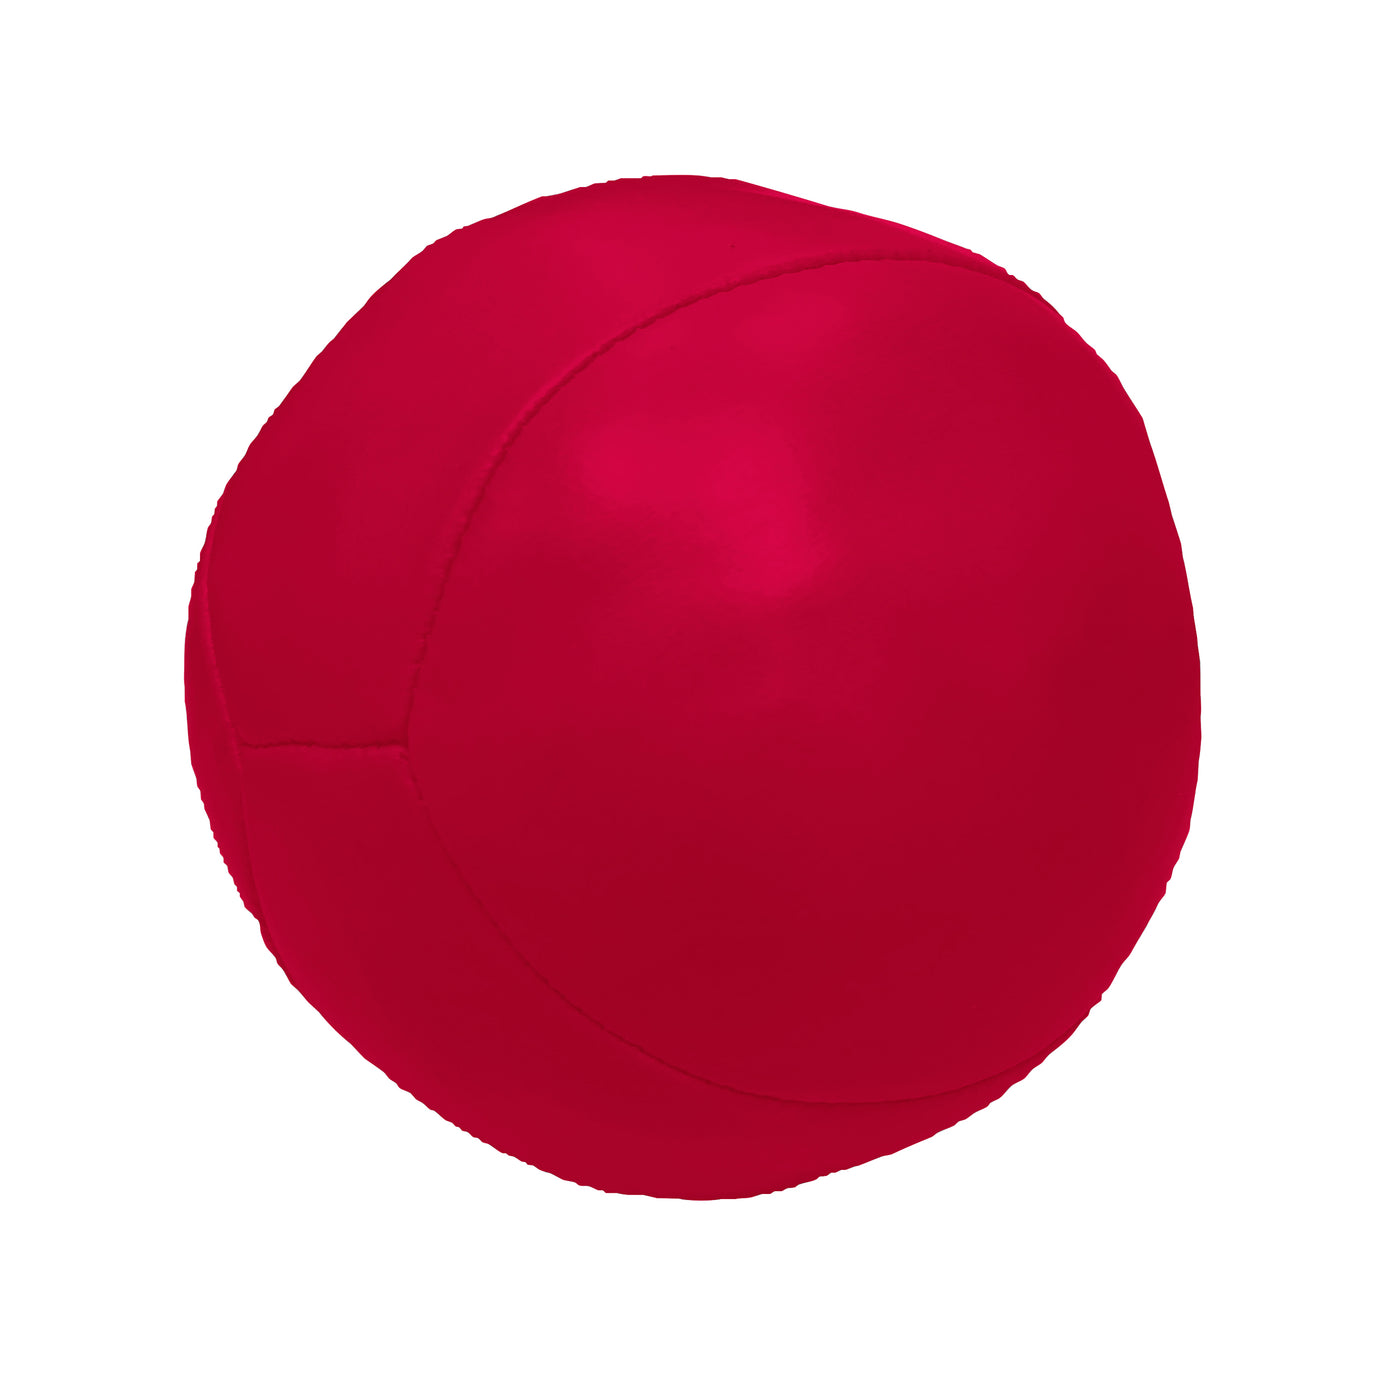 Plain Red 4in Micro Soft Basketball